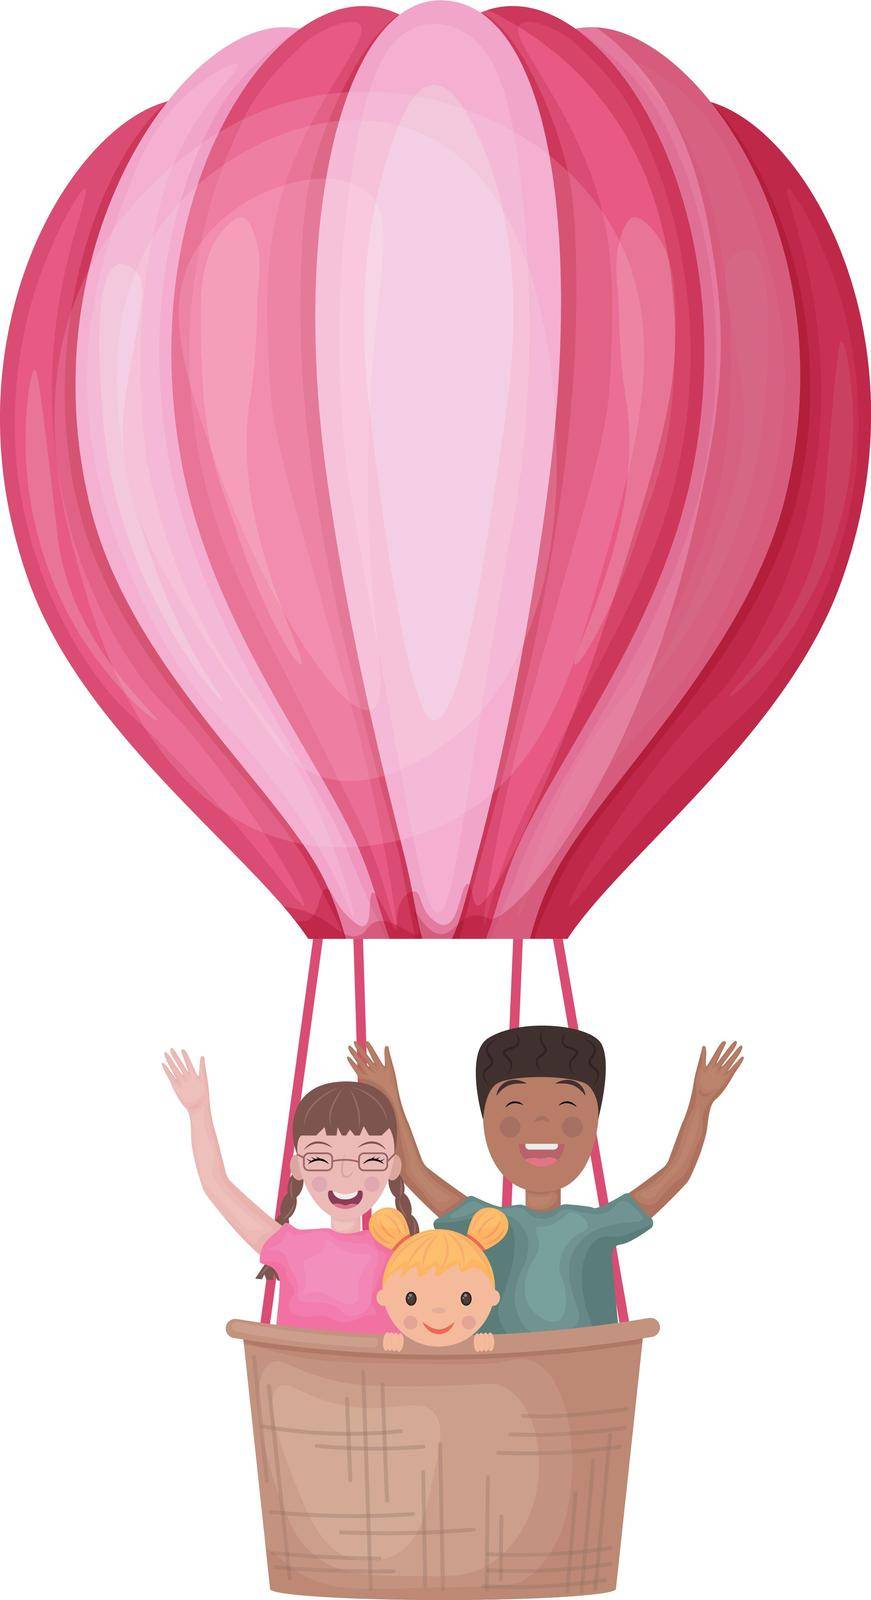 Balloon with children. Different kids on a hot air balloon. Funny children are flying in a balloon and waving their hands. Funny travelers. Vector illustration isolated on a white background.